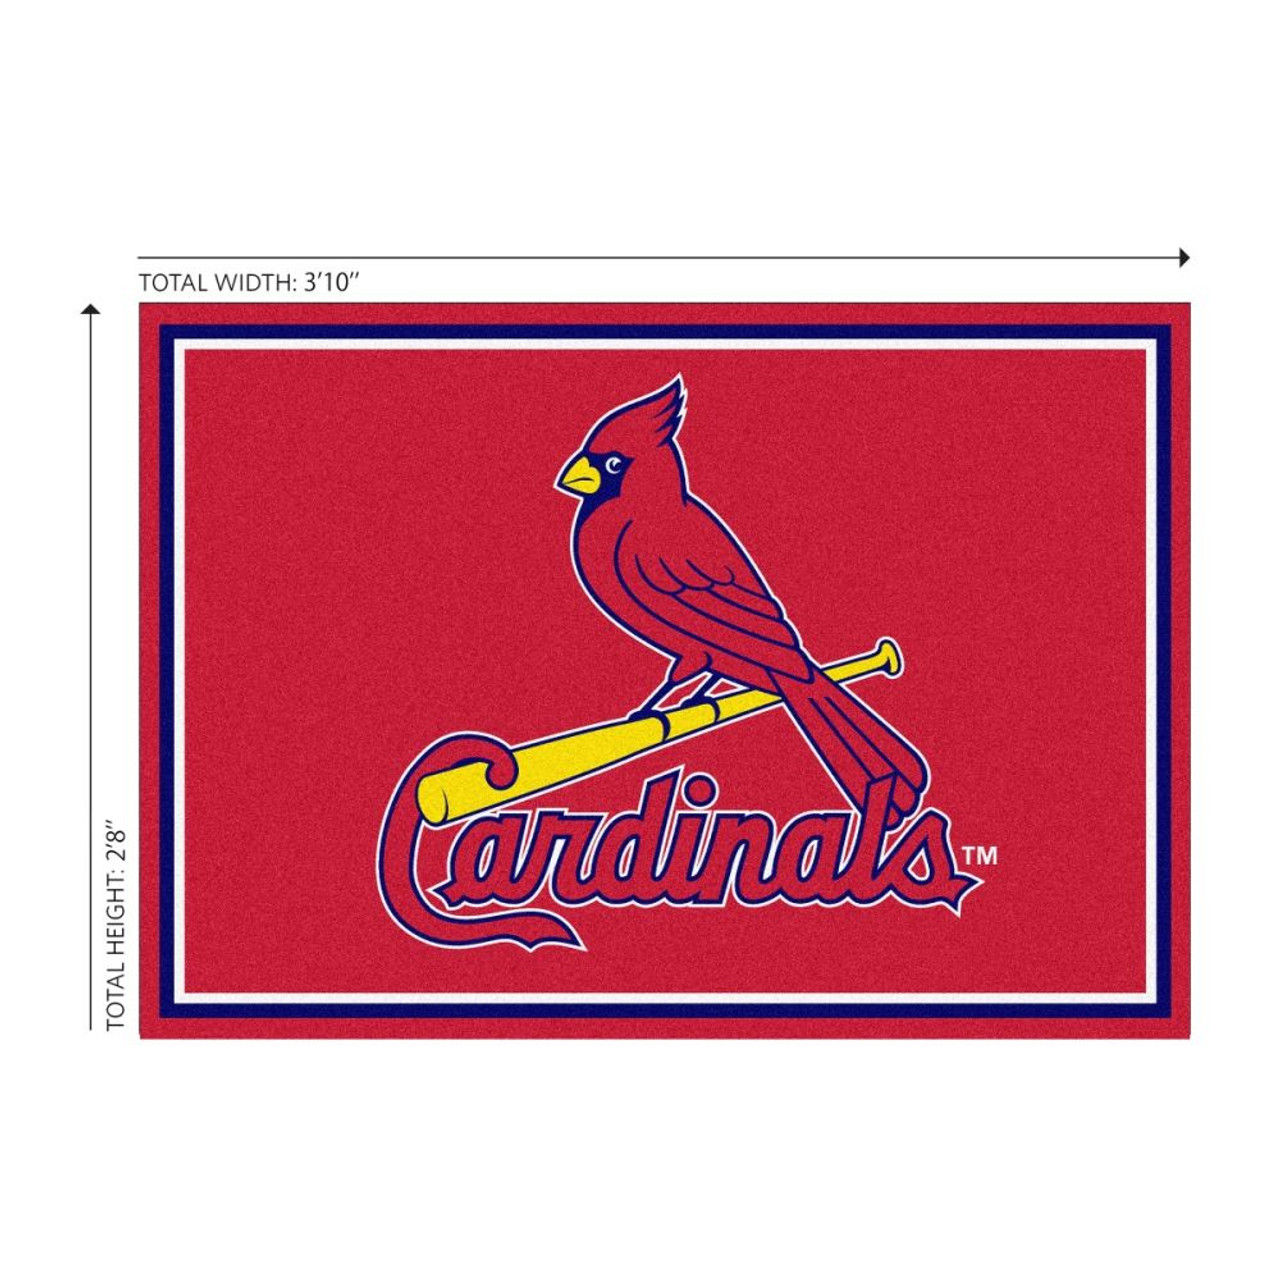 569-2008, STL, St Louis, Cards, Cardinals, 3x4, Area, Rug, MLB, Imperial, Billiards, 720801131641